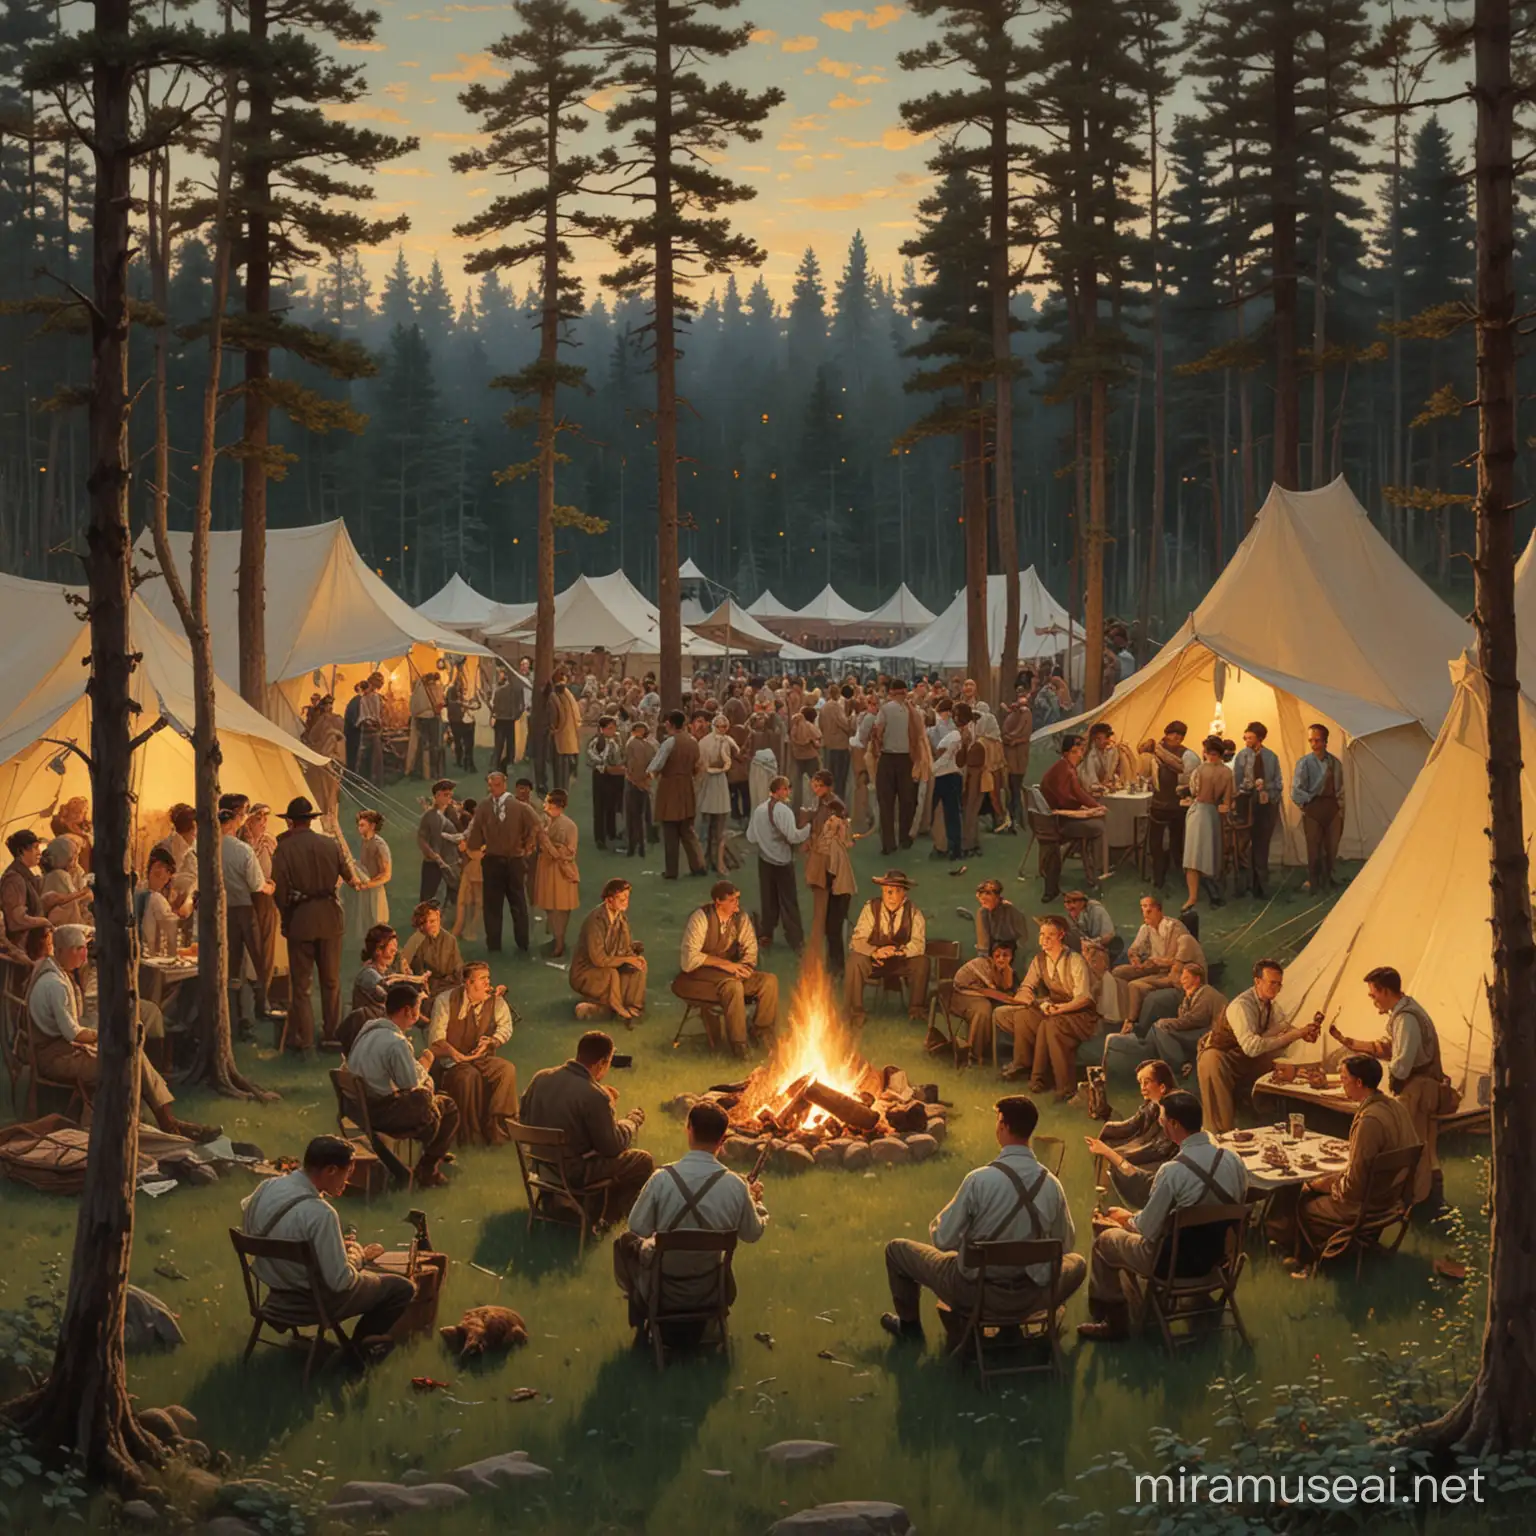 Norman Rockwell painting of a set in a meadow speckled with small pine trees, a canvas party tent is set up with a band playing music, a bonfire is lit outside, partygoers are a vast array of varying characters, also some deer mingle with them, it's dusk, the guests are having conversations and dancing, though the party is lit, the forest surrounding it is dark and ominous